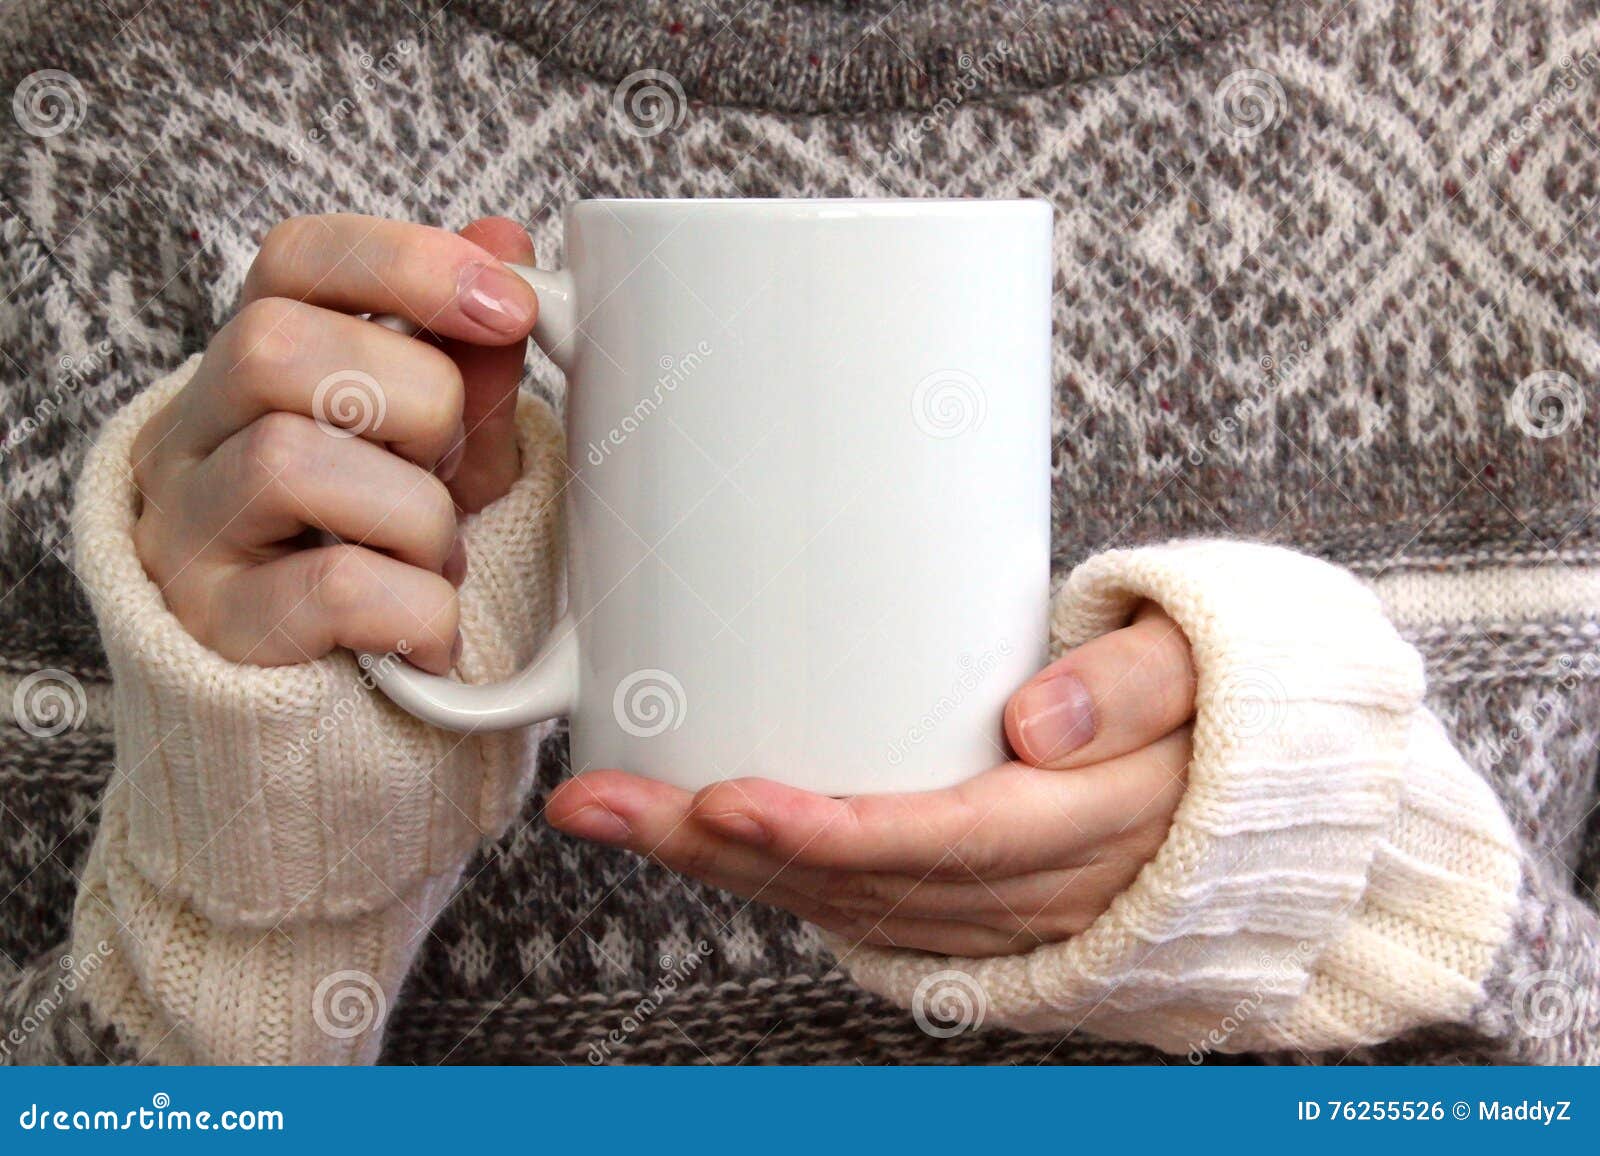 girl in a warm sweater is holding white mug in hands.